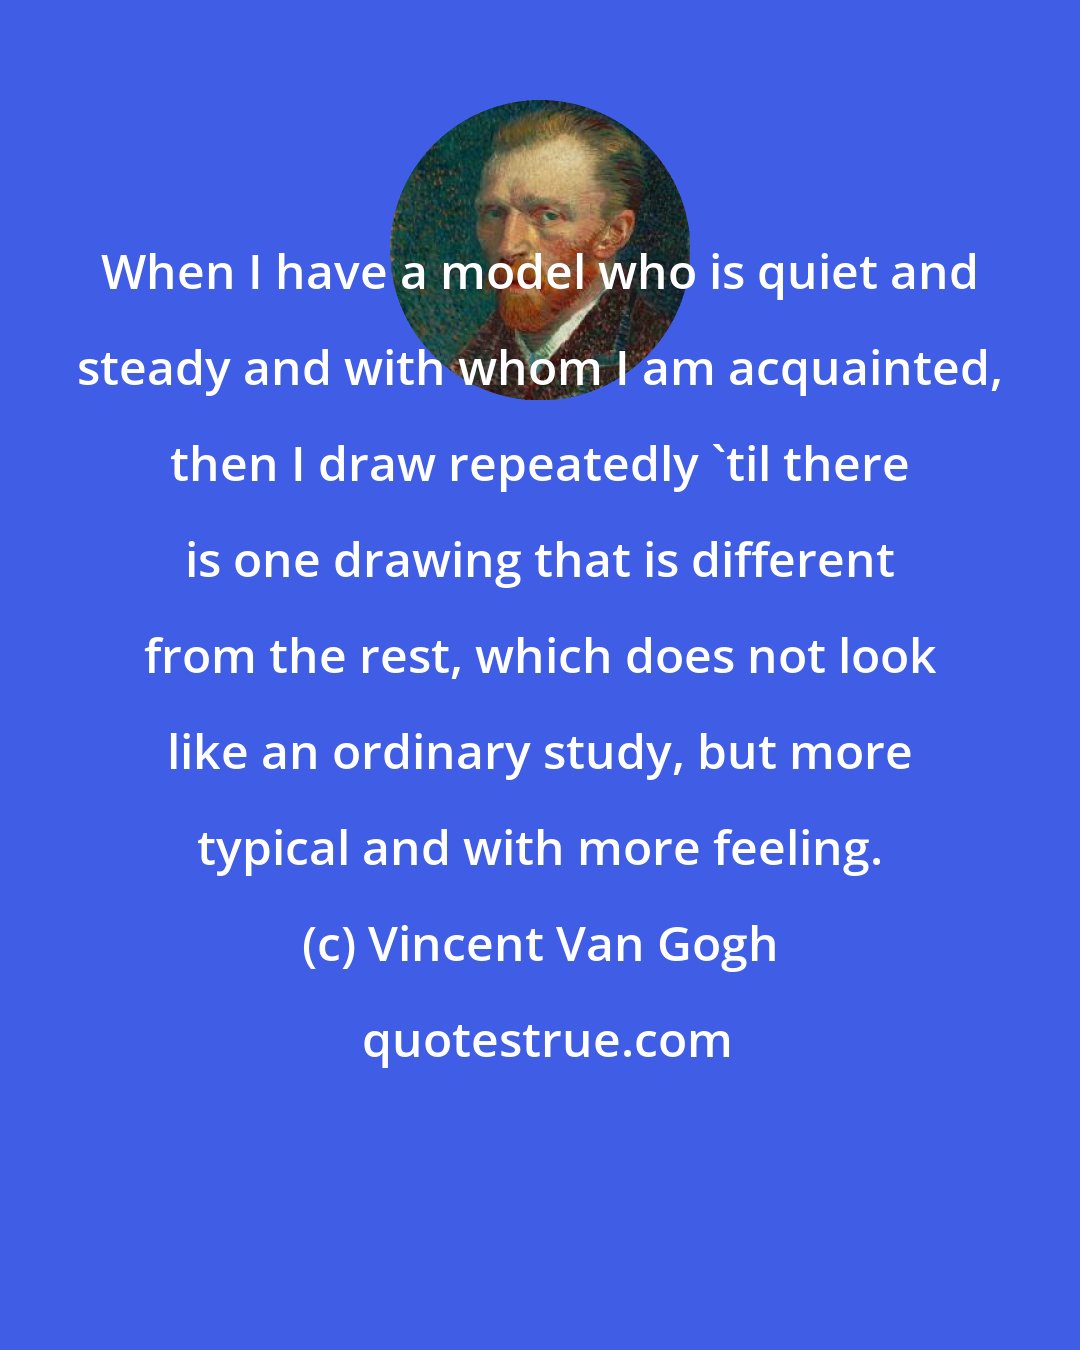 Vincent Van Gogh: When I have a model who is quiet and steady and with whom I am acquainted, then I draw repeatedly 'til there is one drawing that is different from the rest, which does not look like an ordinary study, but more typical and with more feeling.